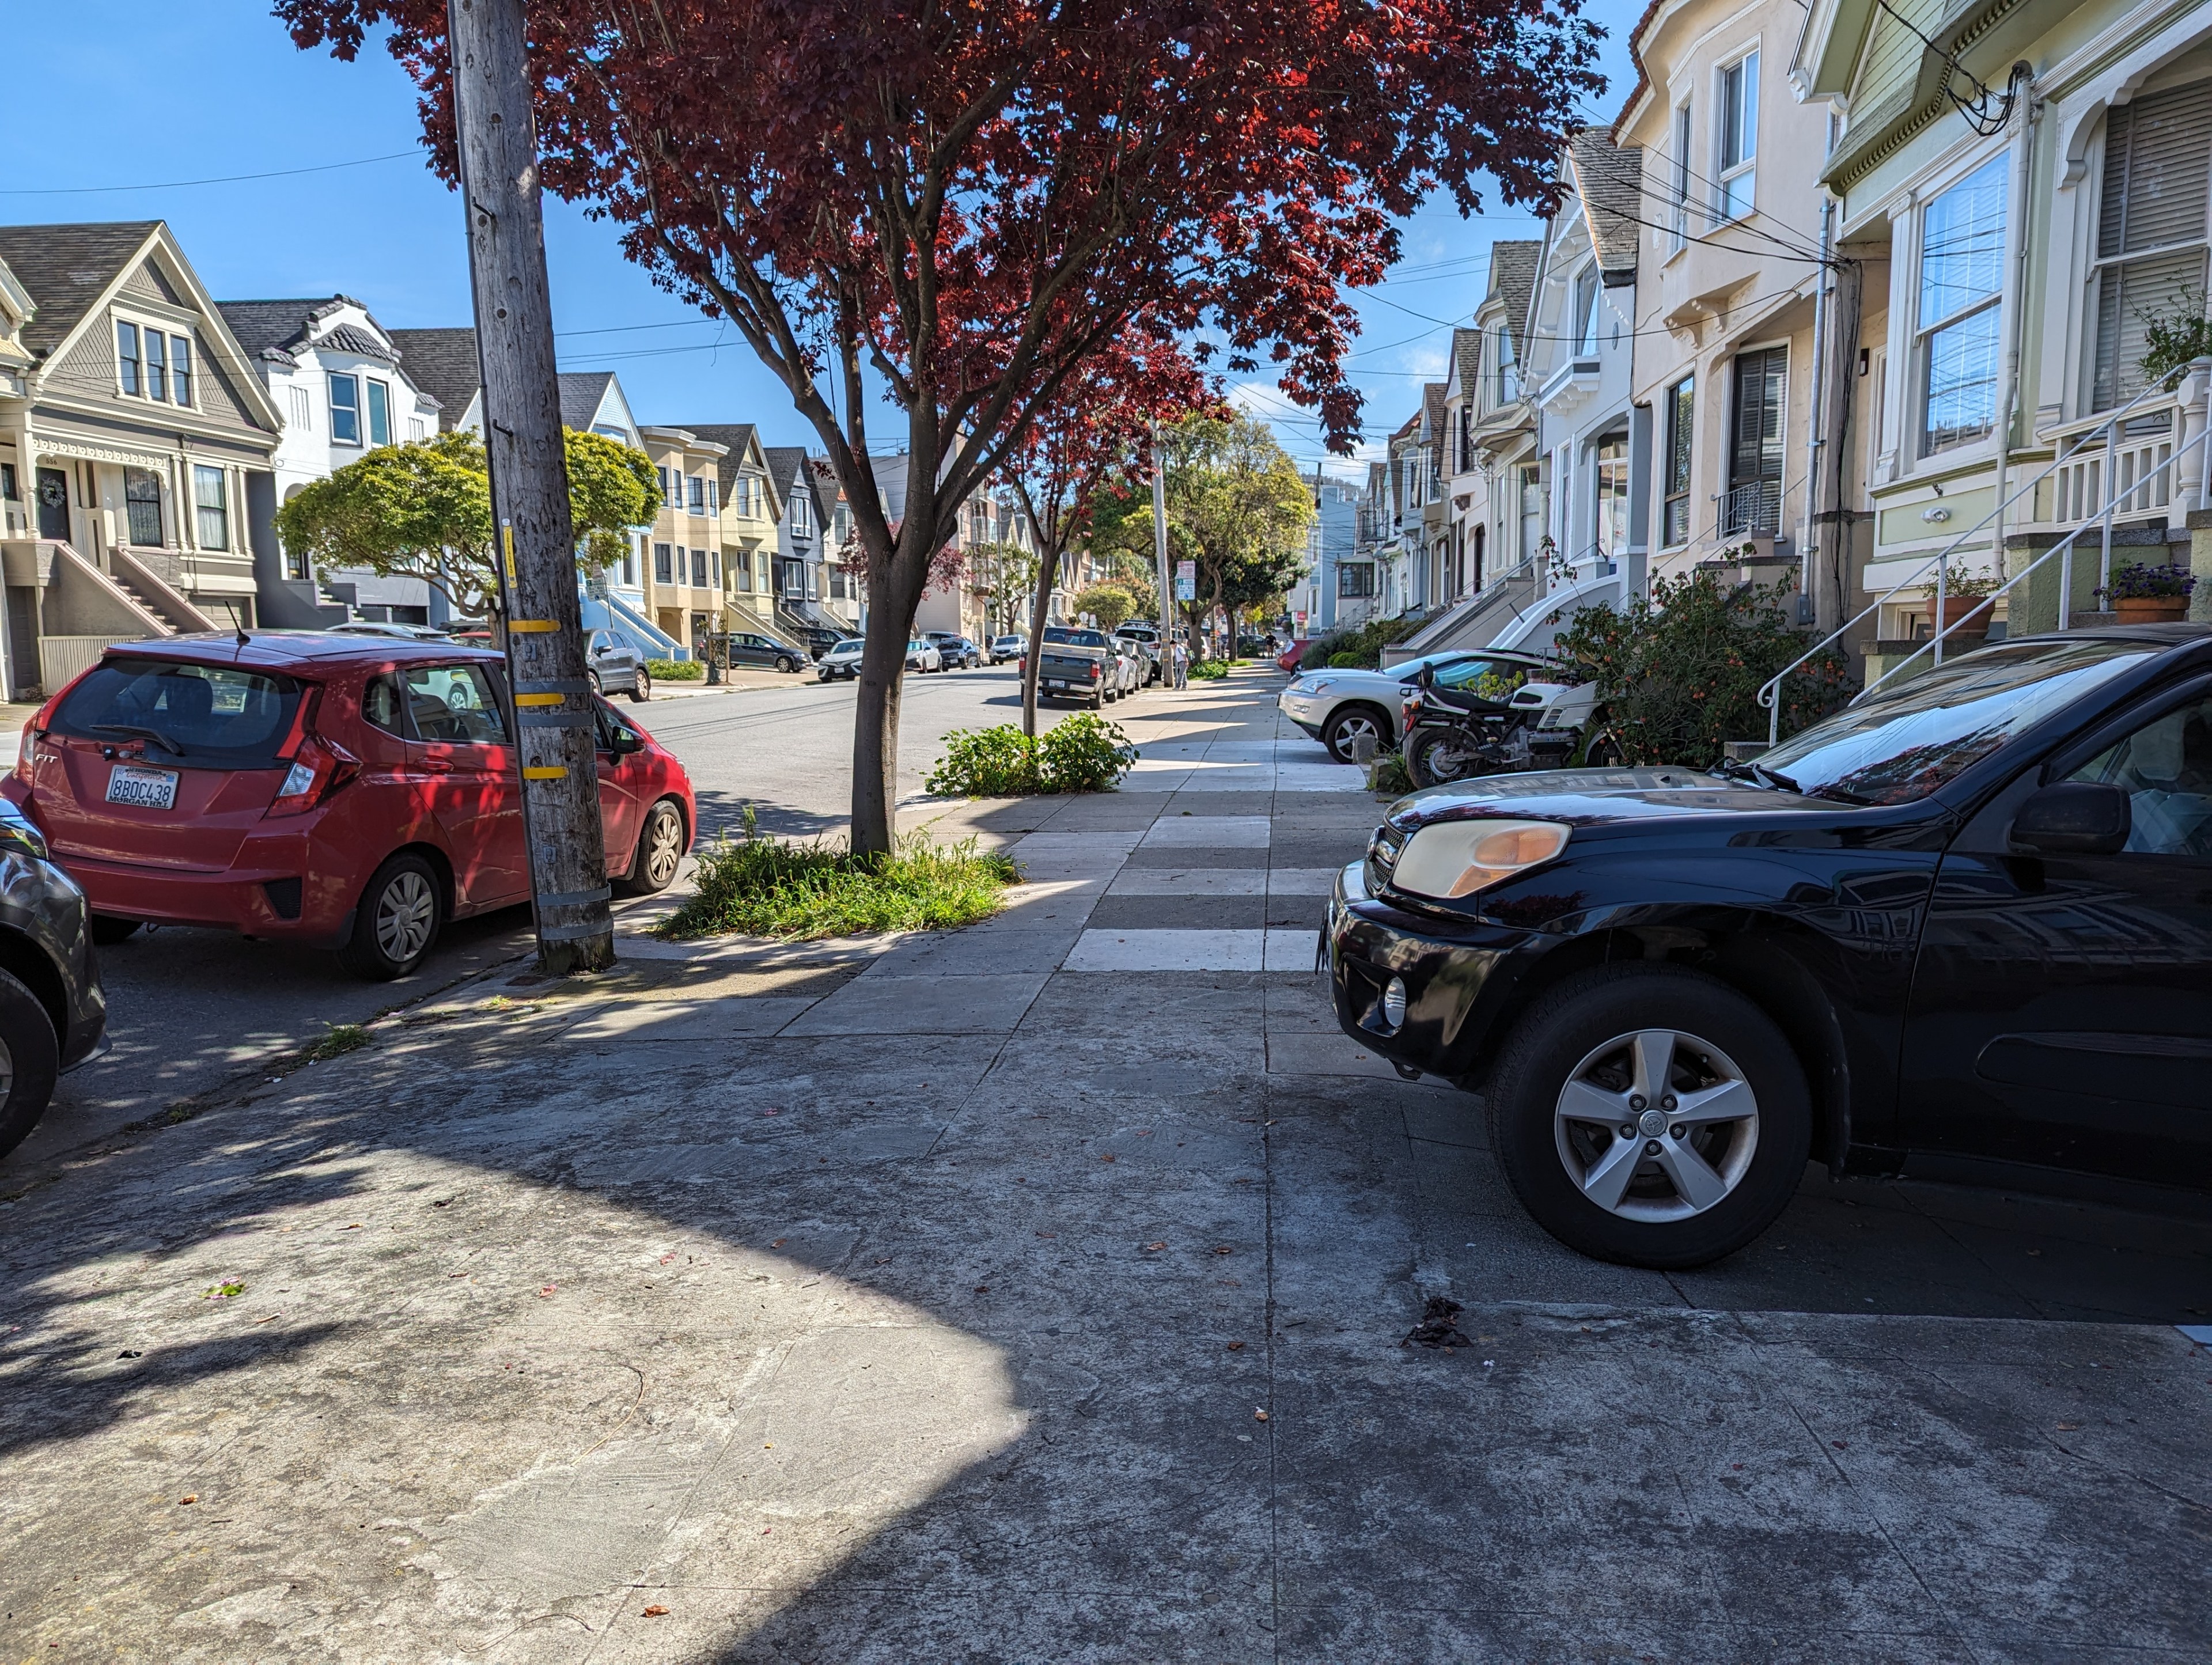 A line of cars are parked in driveways on a residential street.